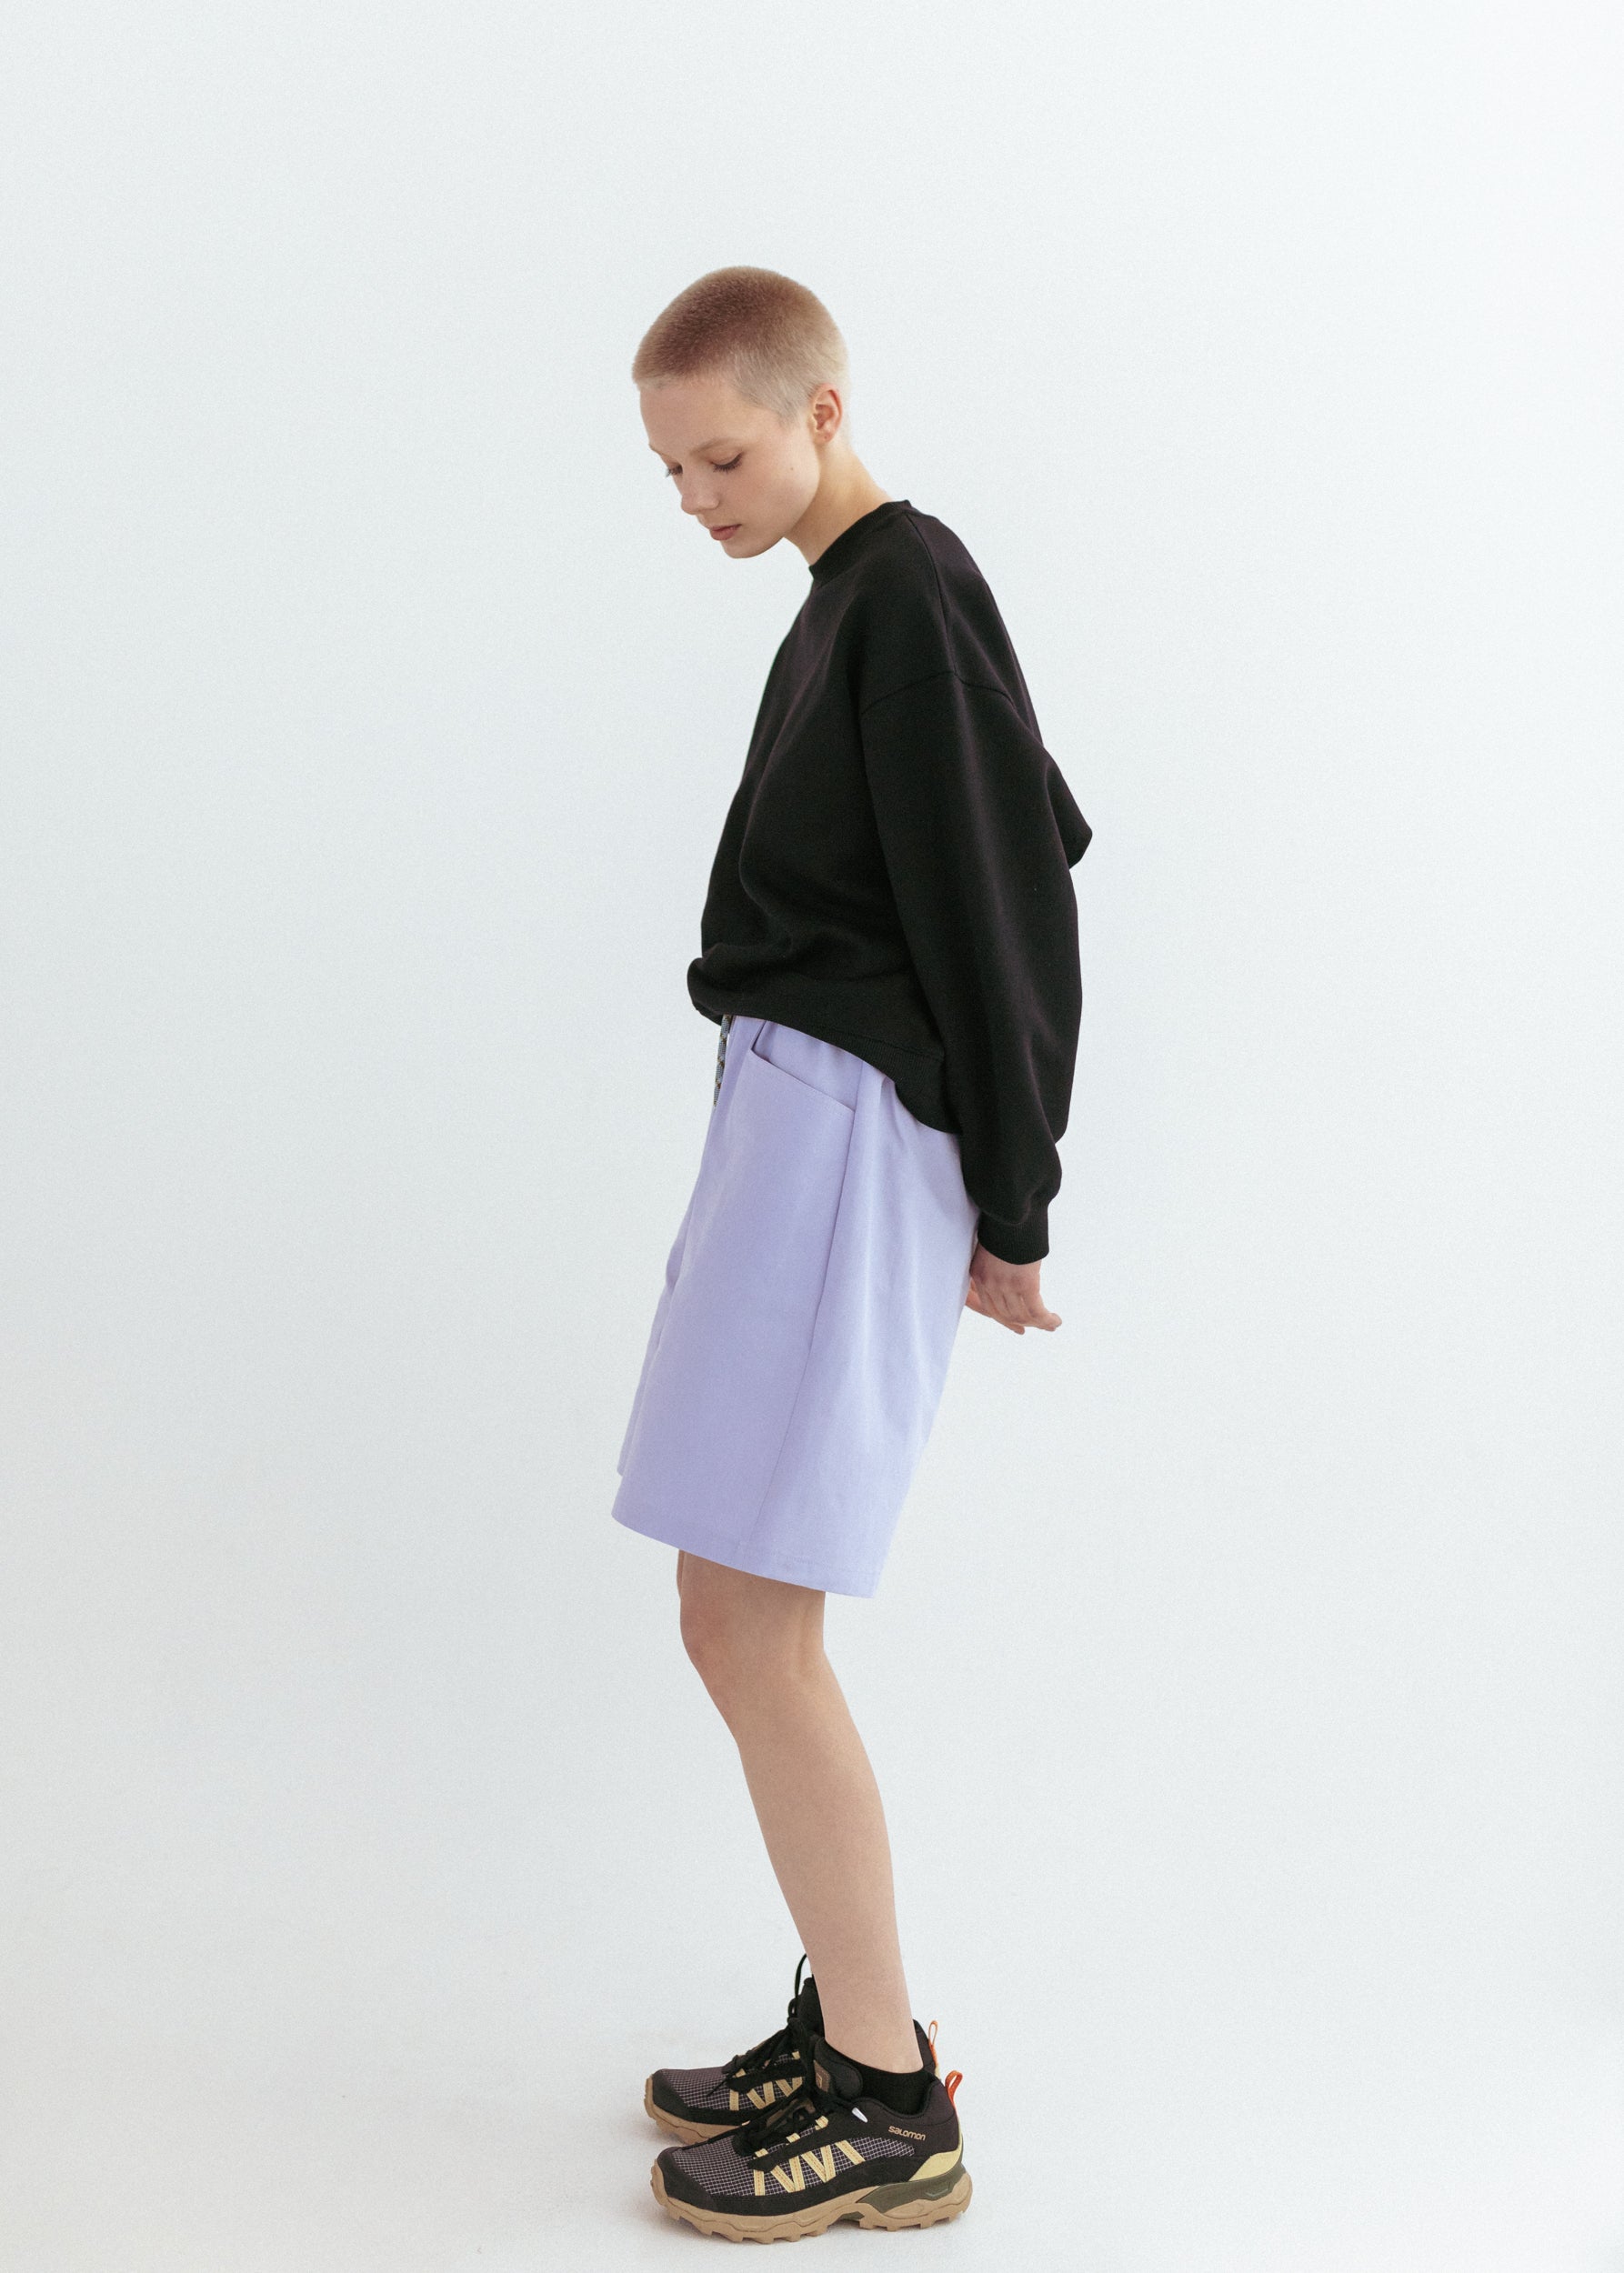 Lilac relaxed fit twill shorts and black organic sweatshirt